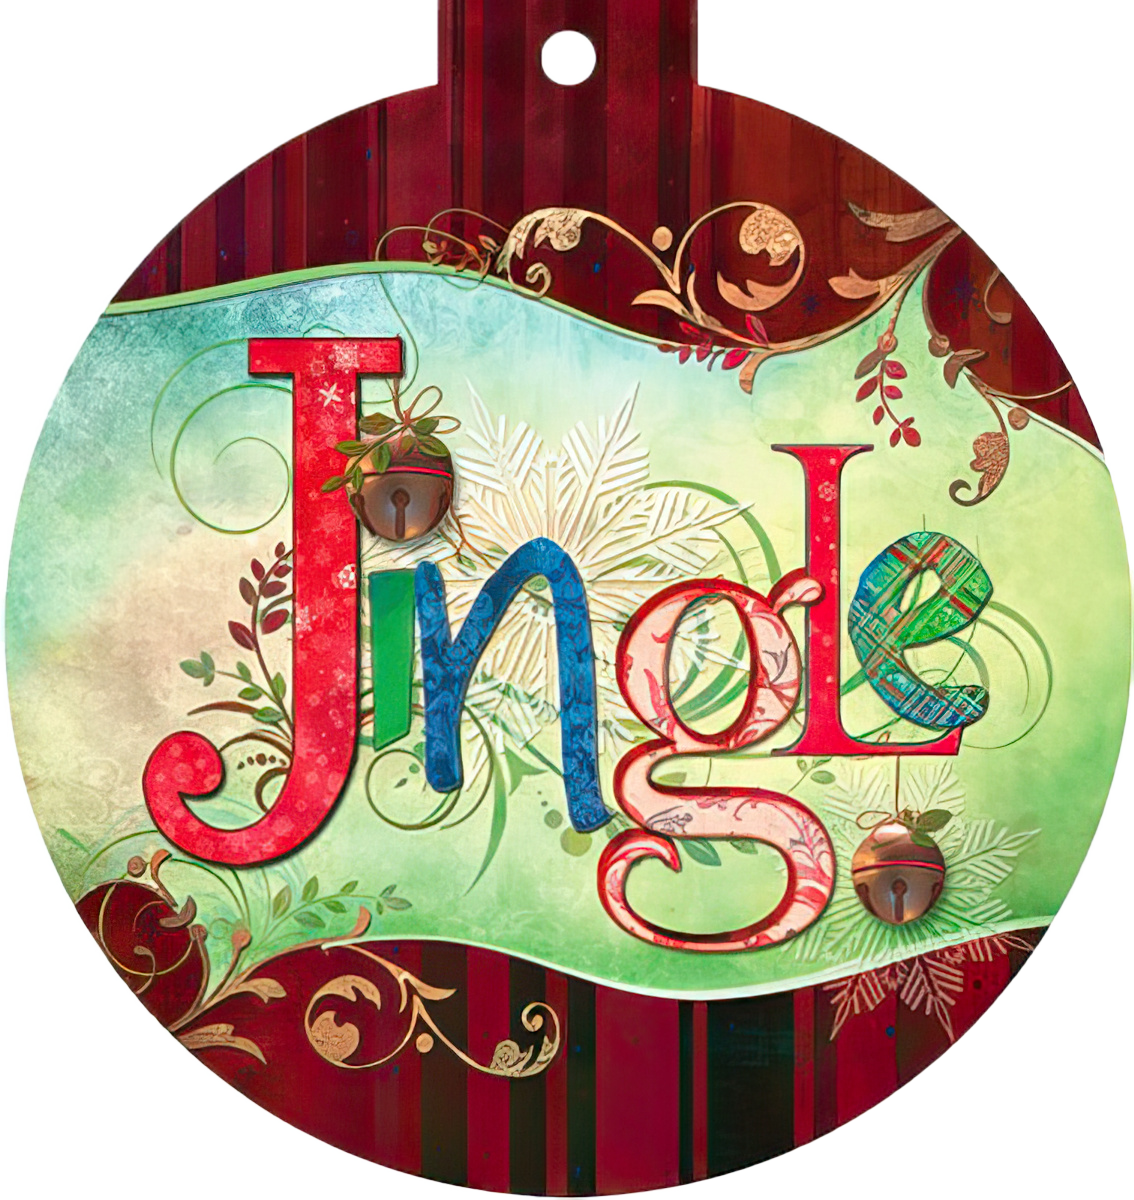 Happy jingle bell time!